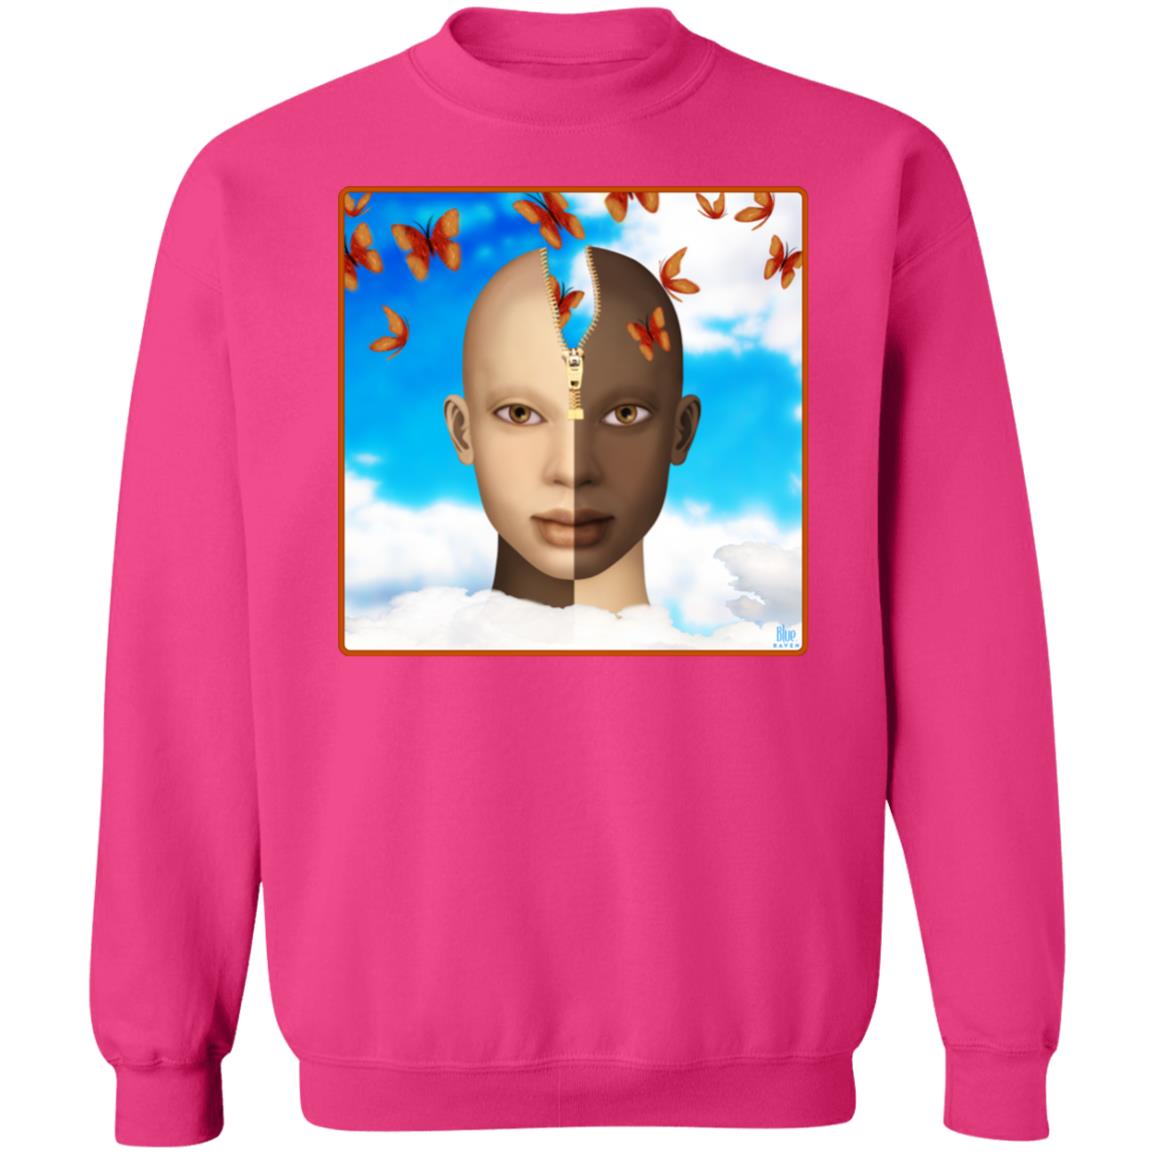 Color Of Our Thoughts - Unisex Crew Neck Sweatshirt